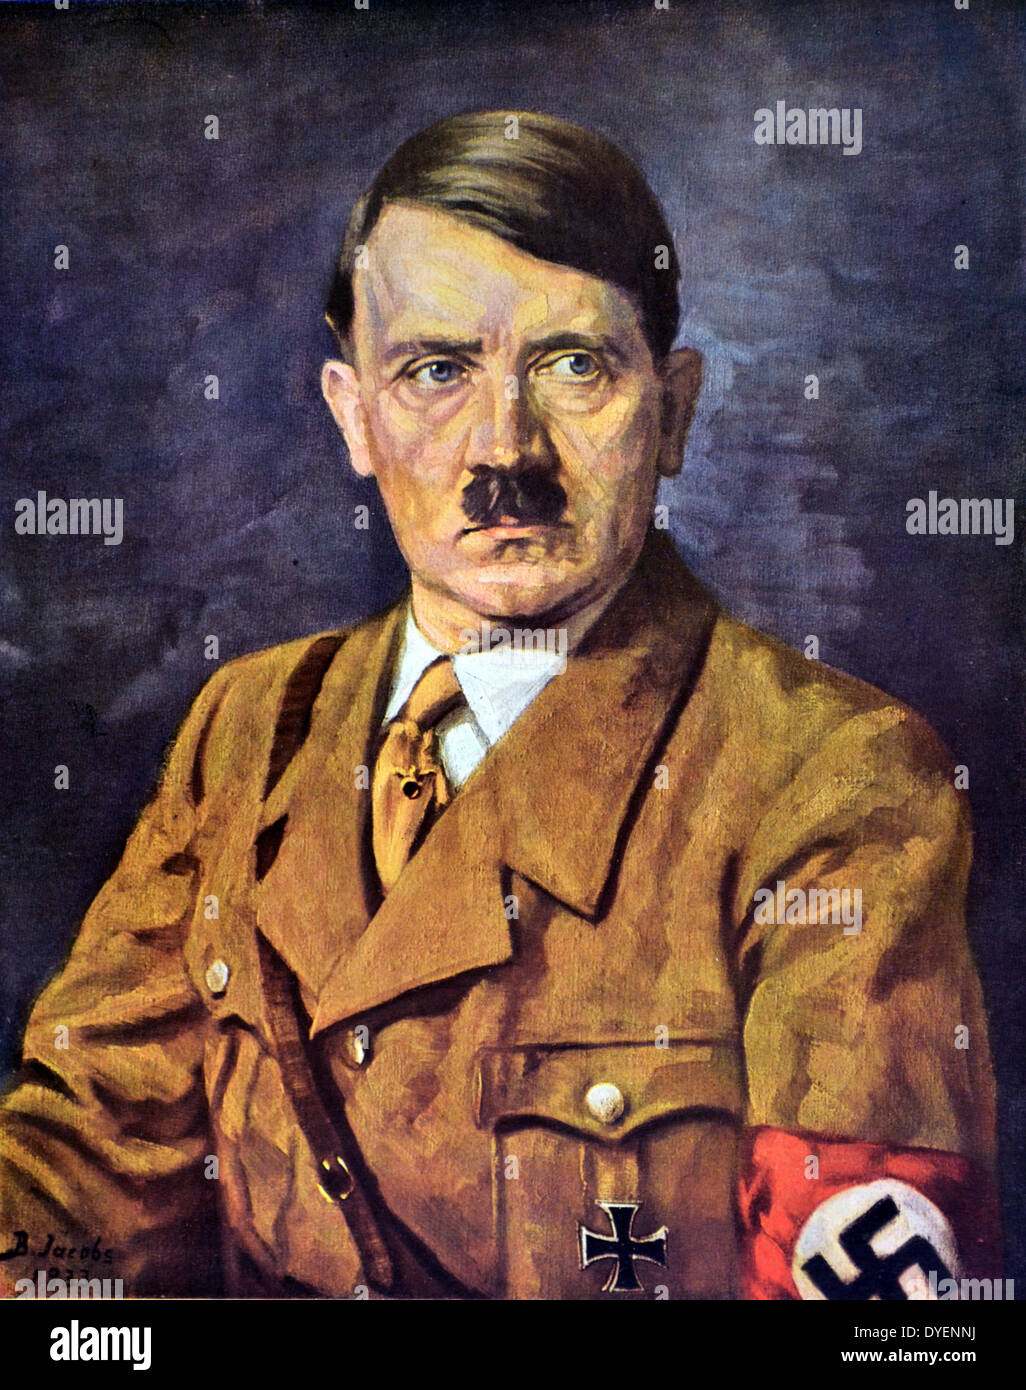 Adolf Hitler 1889-1945. German politician and the leader of the Nazi Party. He was chancellor of Germany from 1933 to 1945 and dictator of Nazi Germany from 1934 to 1945. Stock Photo